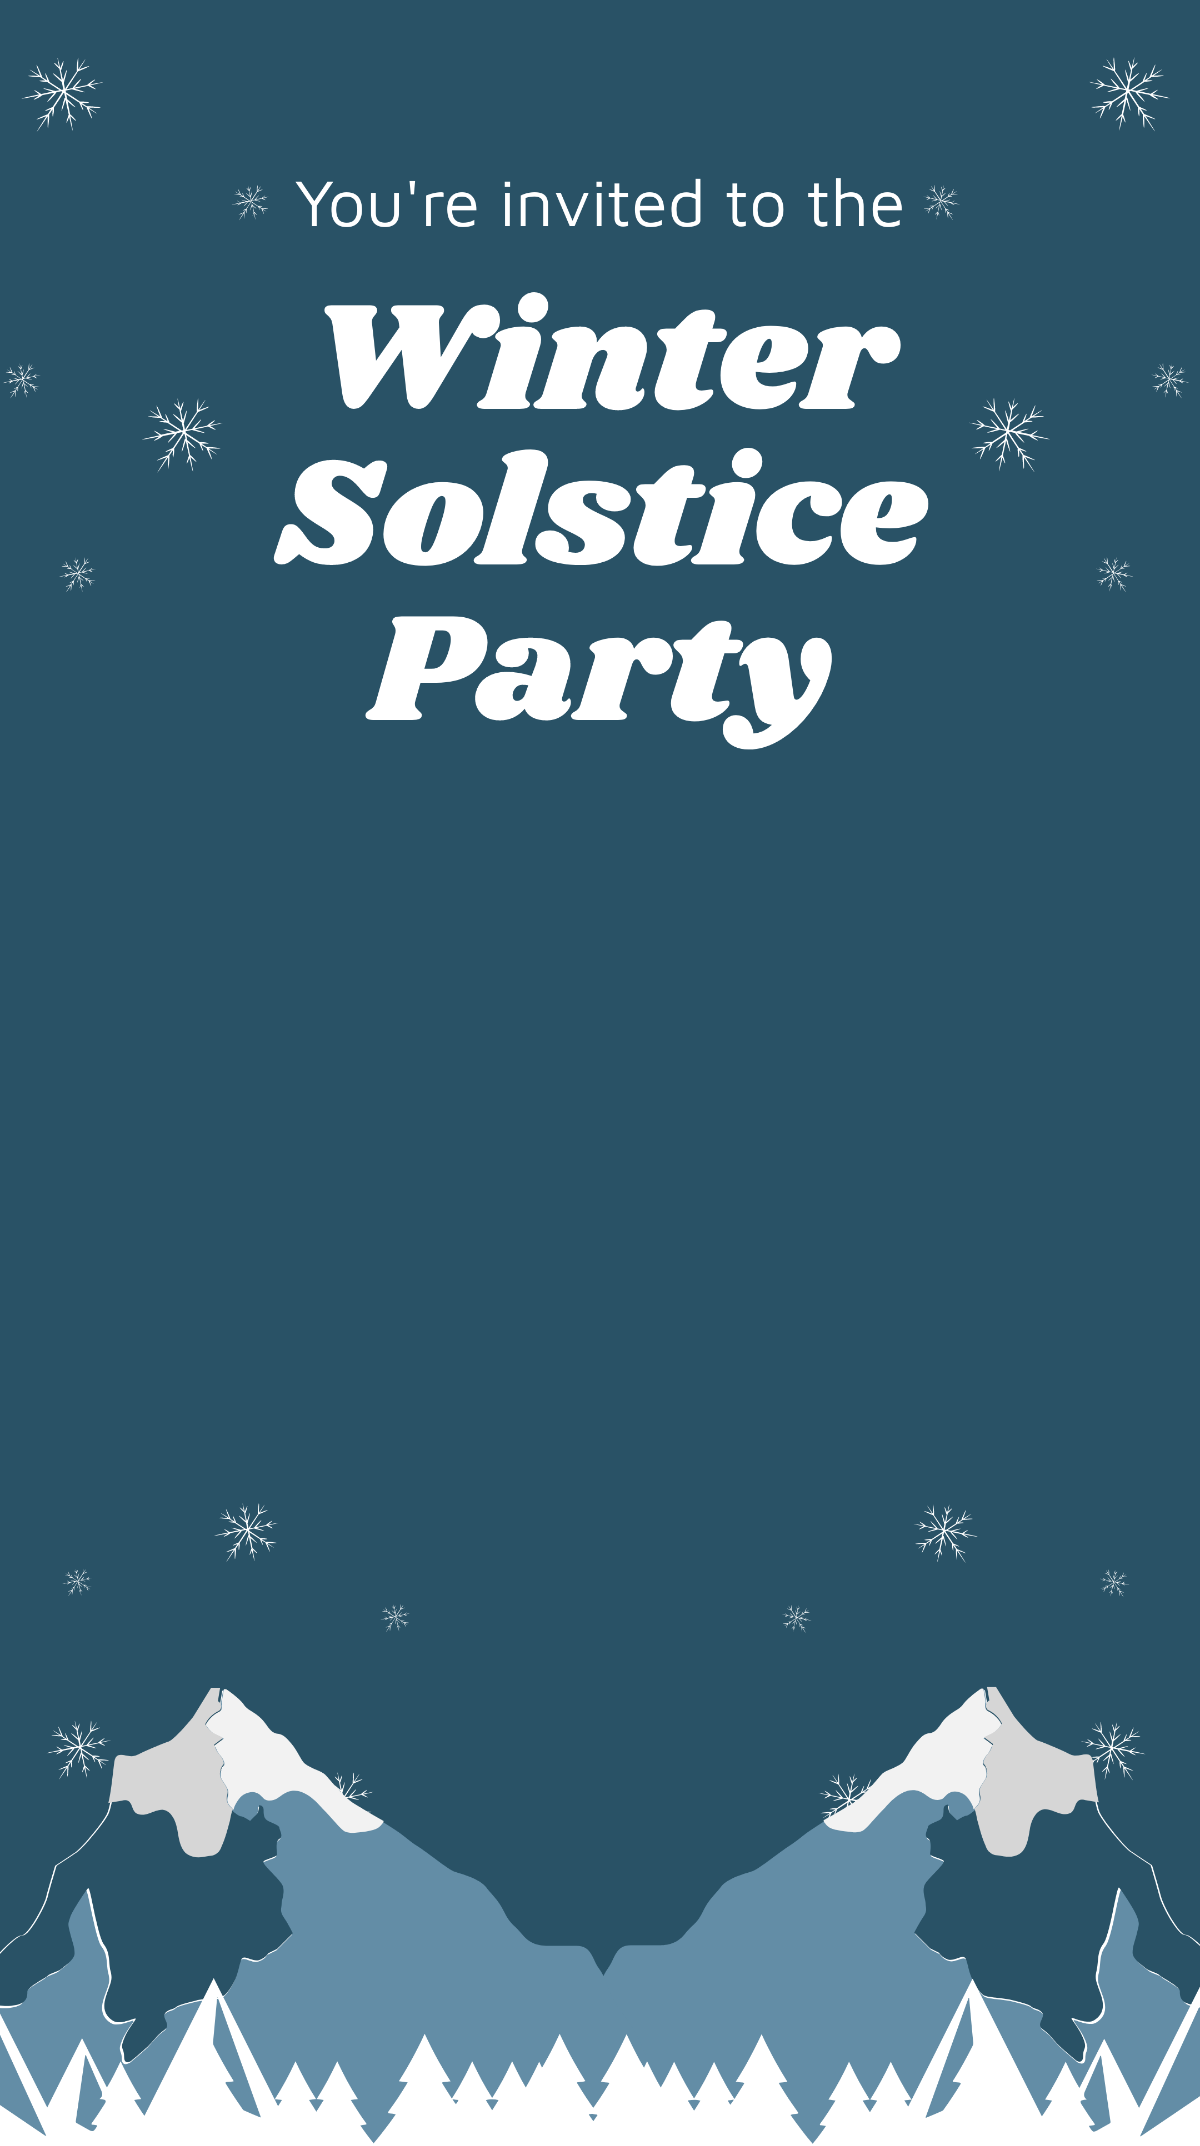 Free Winter Solstice Party Snapchat Geofilter Template